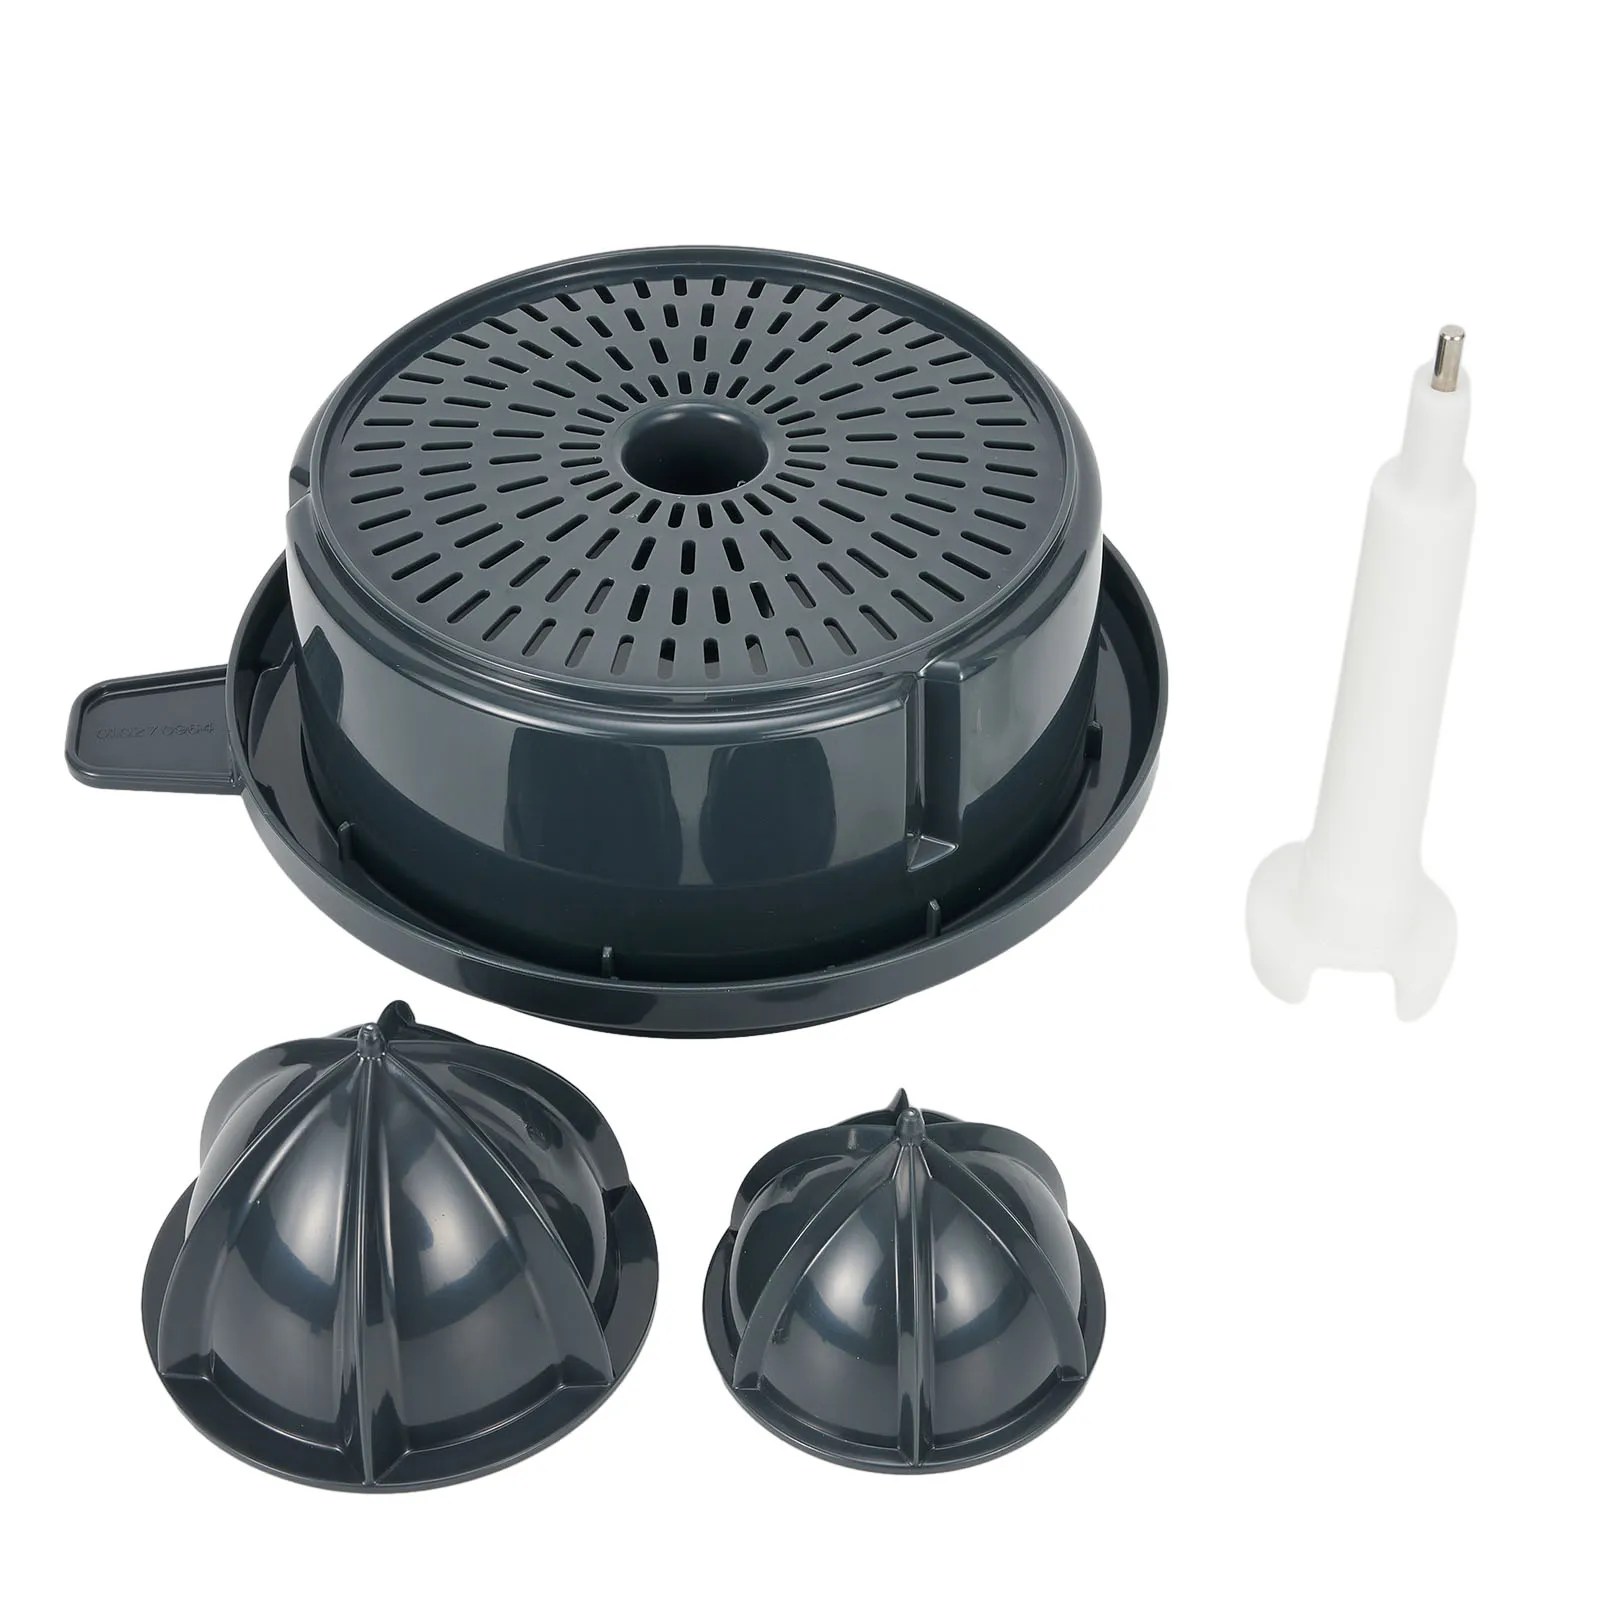 

Multifunctional For Thermomix TM5/TM6 Juicing Set Replacement Parts for Juicer Sustainable Use Dishwasher Safe